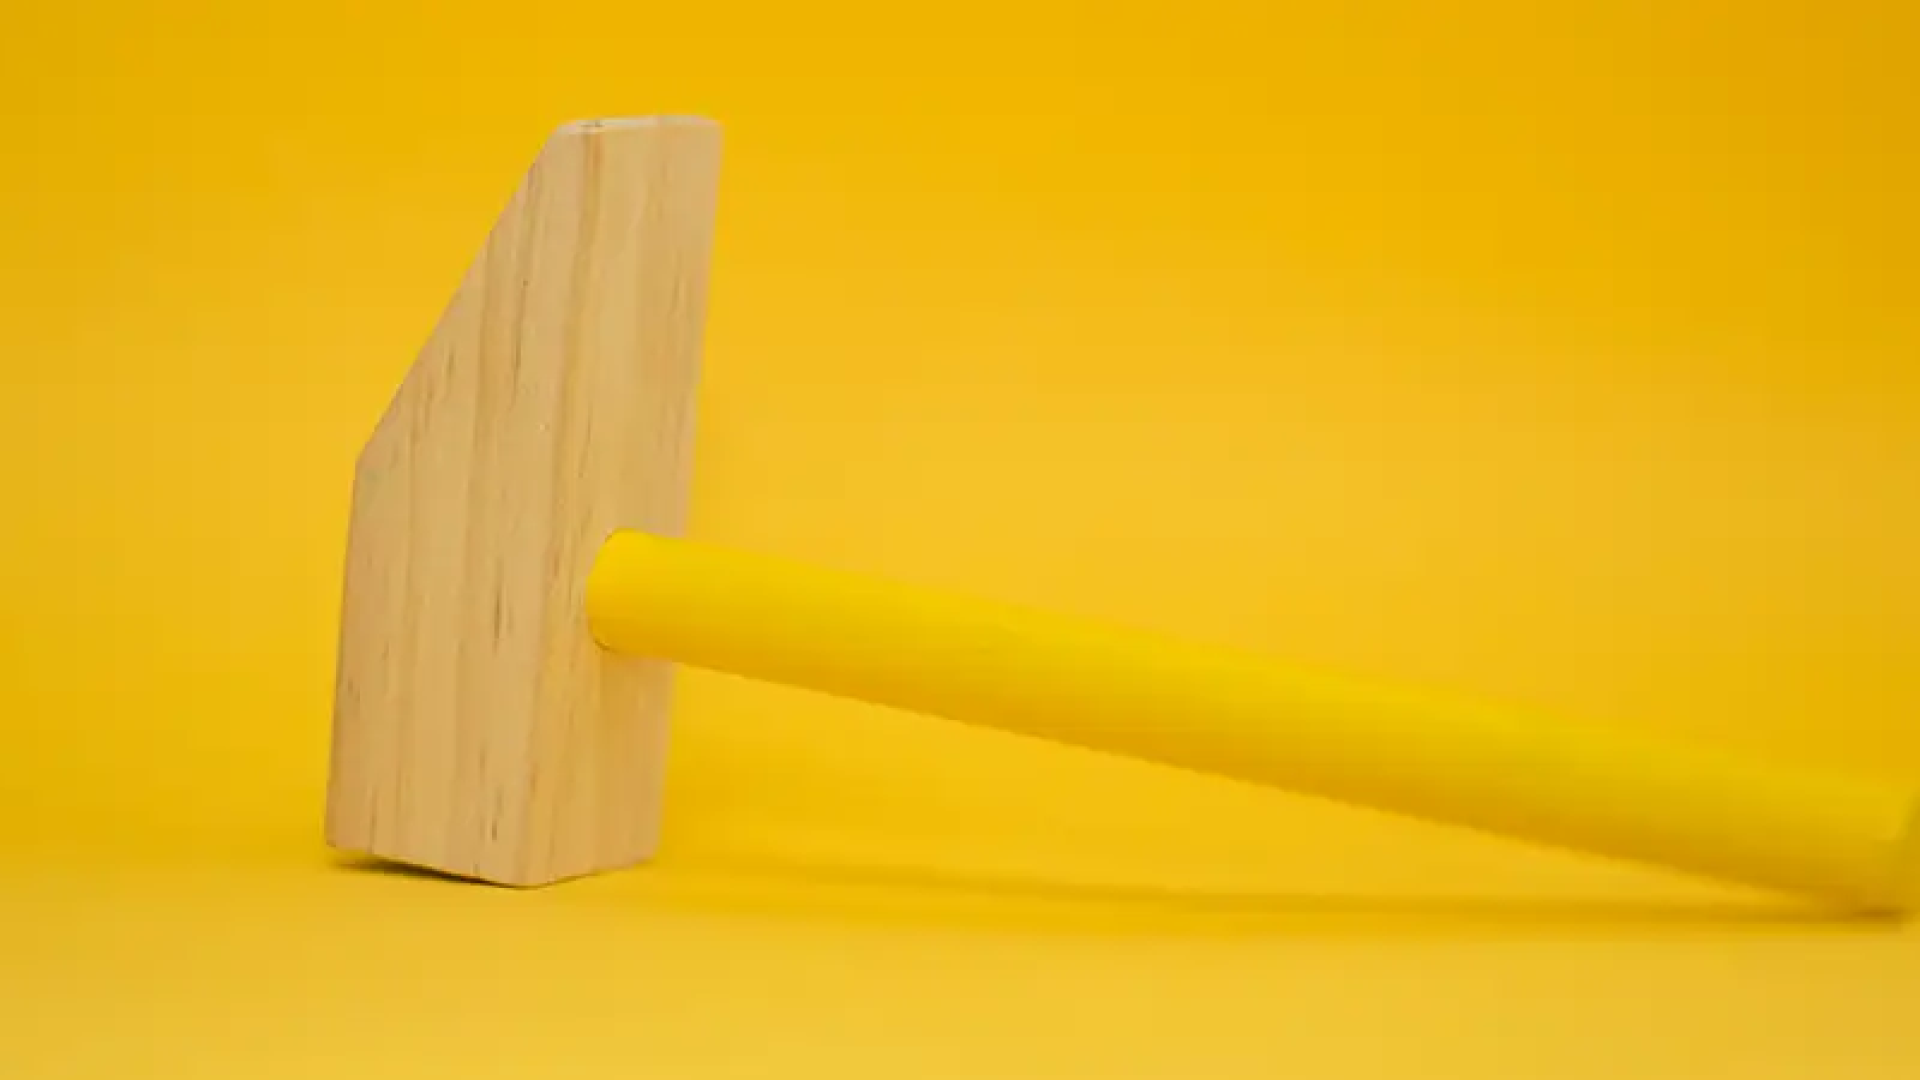 image of a hammer